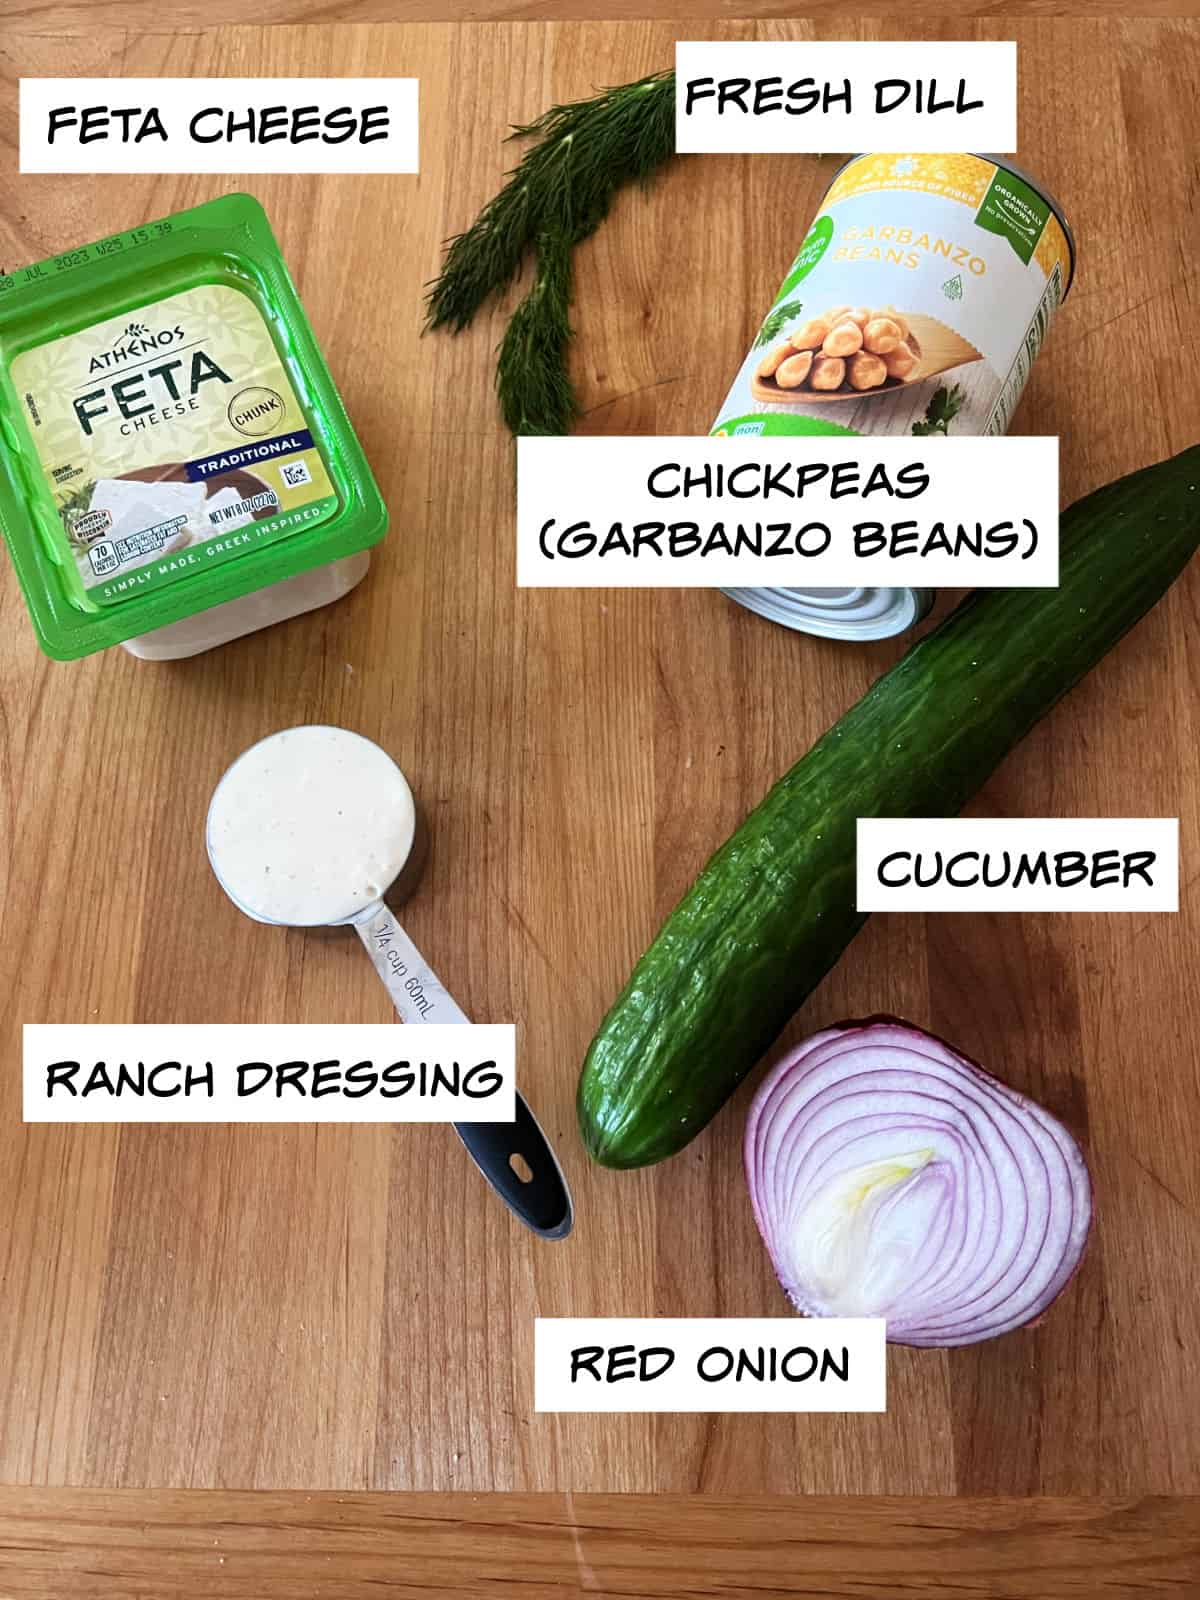 ingredients: feta cheese, chickpeas, cucumber, red onion, ranch dressing.